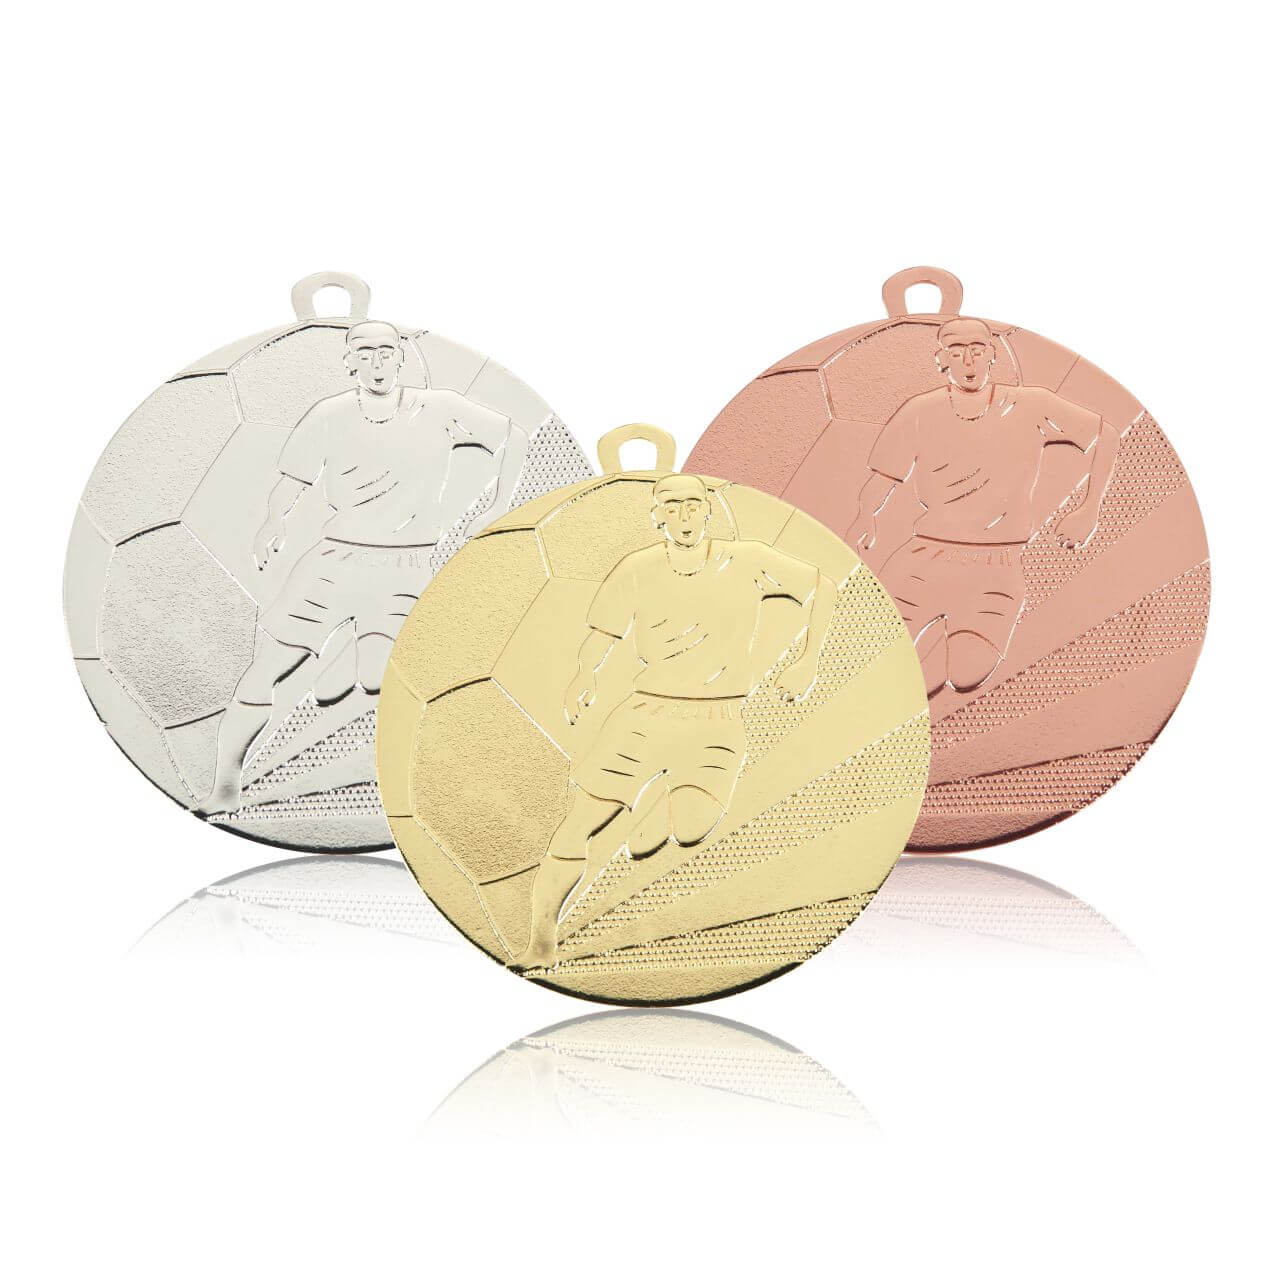 Medaille Fußball 70mm  - Farbe: Bronze